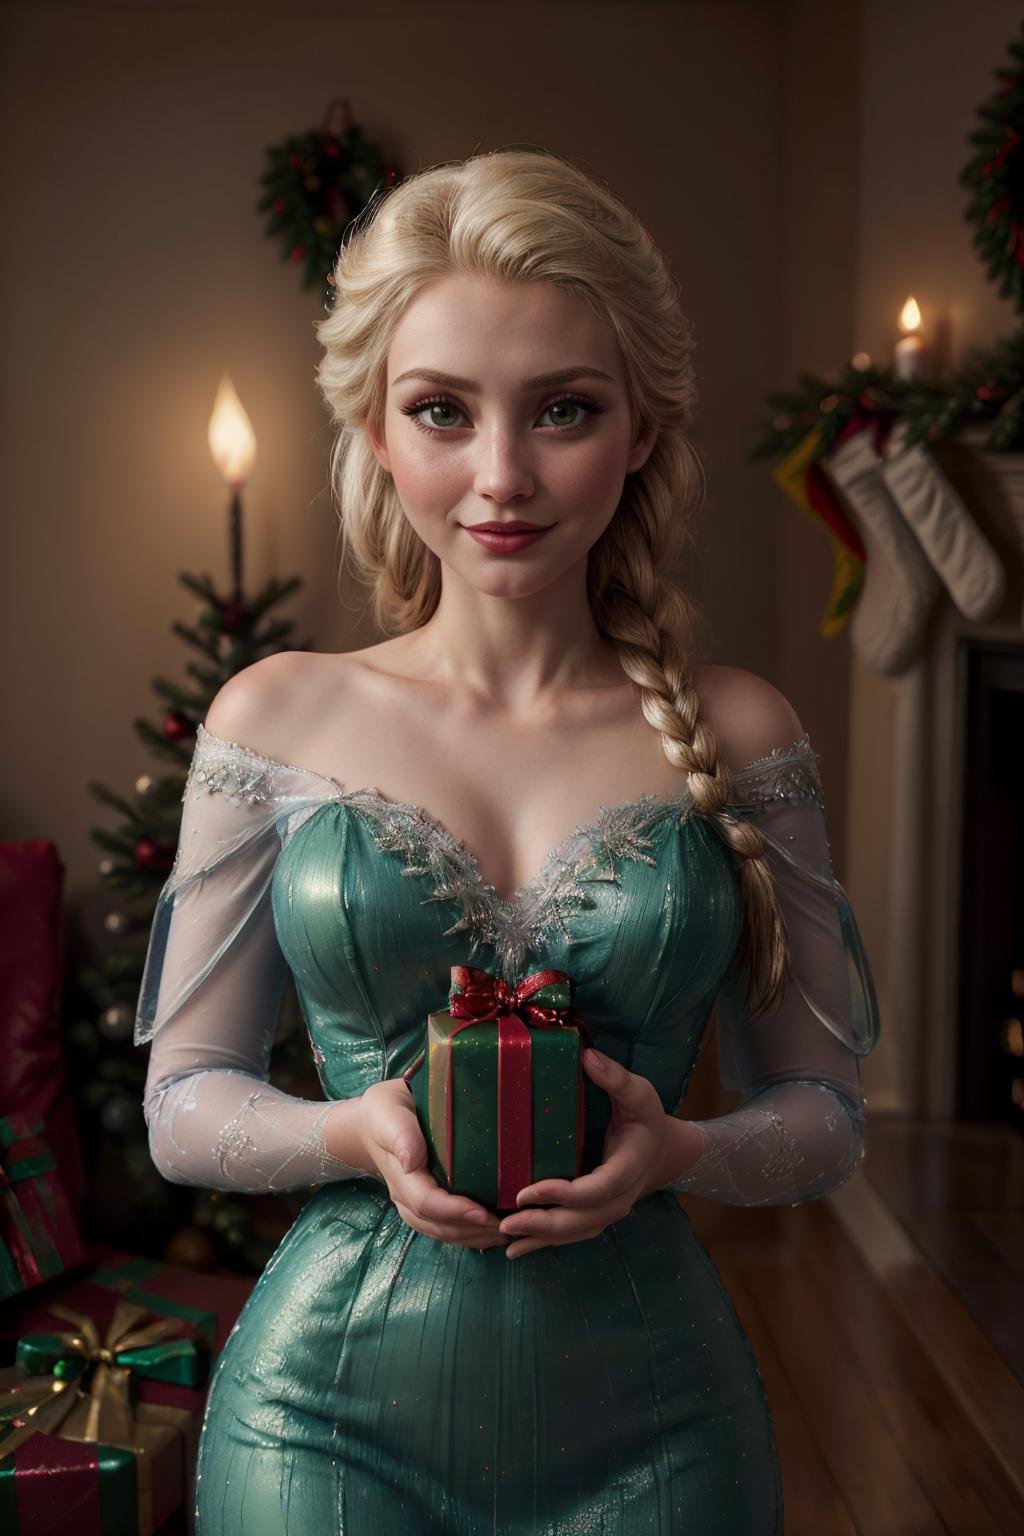 (Elsa holding Christmas present:1.45), (extremely happy:1.34), (ElsaWaifu:0.6), (red and green dress:1.3), (masterpiece:1.34), (absurdres:1.52), (warm firelit living room with Christmas decorations:1.3), (8k, 4k, intricate:1.34), (realistic:1.28), (photo realistic:1.37), (high quality shadow:1.32), (ultra high quality:1.32), (best quality:1.32), (highly detailed textures:1.29),<lora:add_detail:1> <lora:popular:1> <lora:SDXLrender_v1.0:0.6> <lora:epiCRealismHelper:1> <lora:Elsa_character-20:0.4>